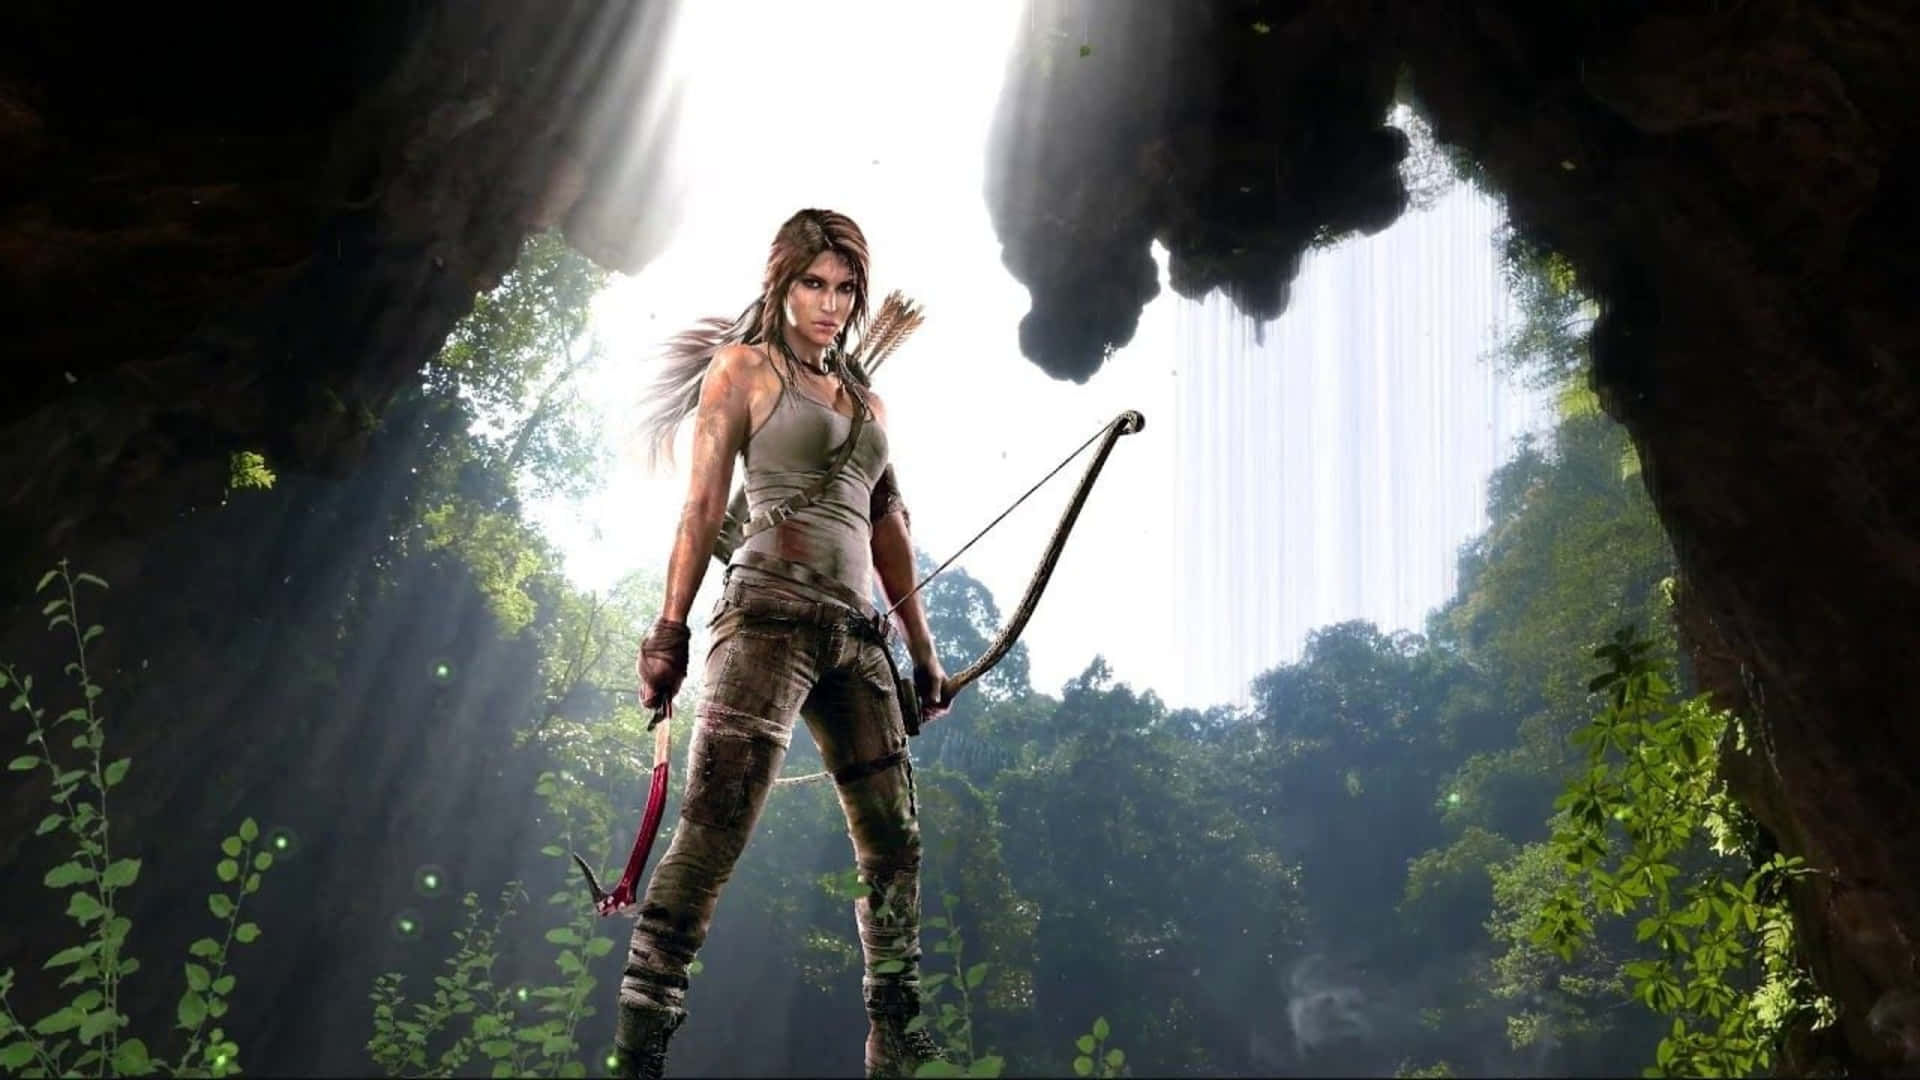 Adventure awaits in Shadow of the Tomb Raider